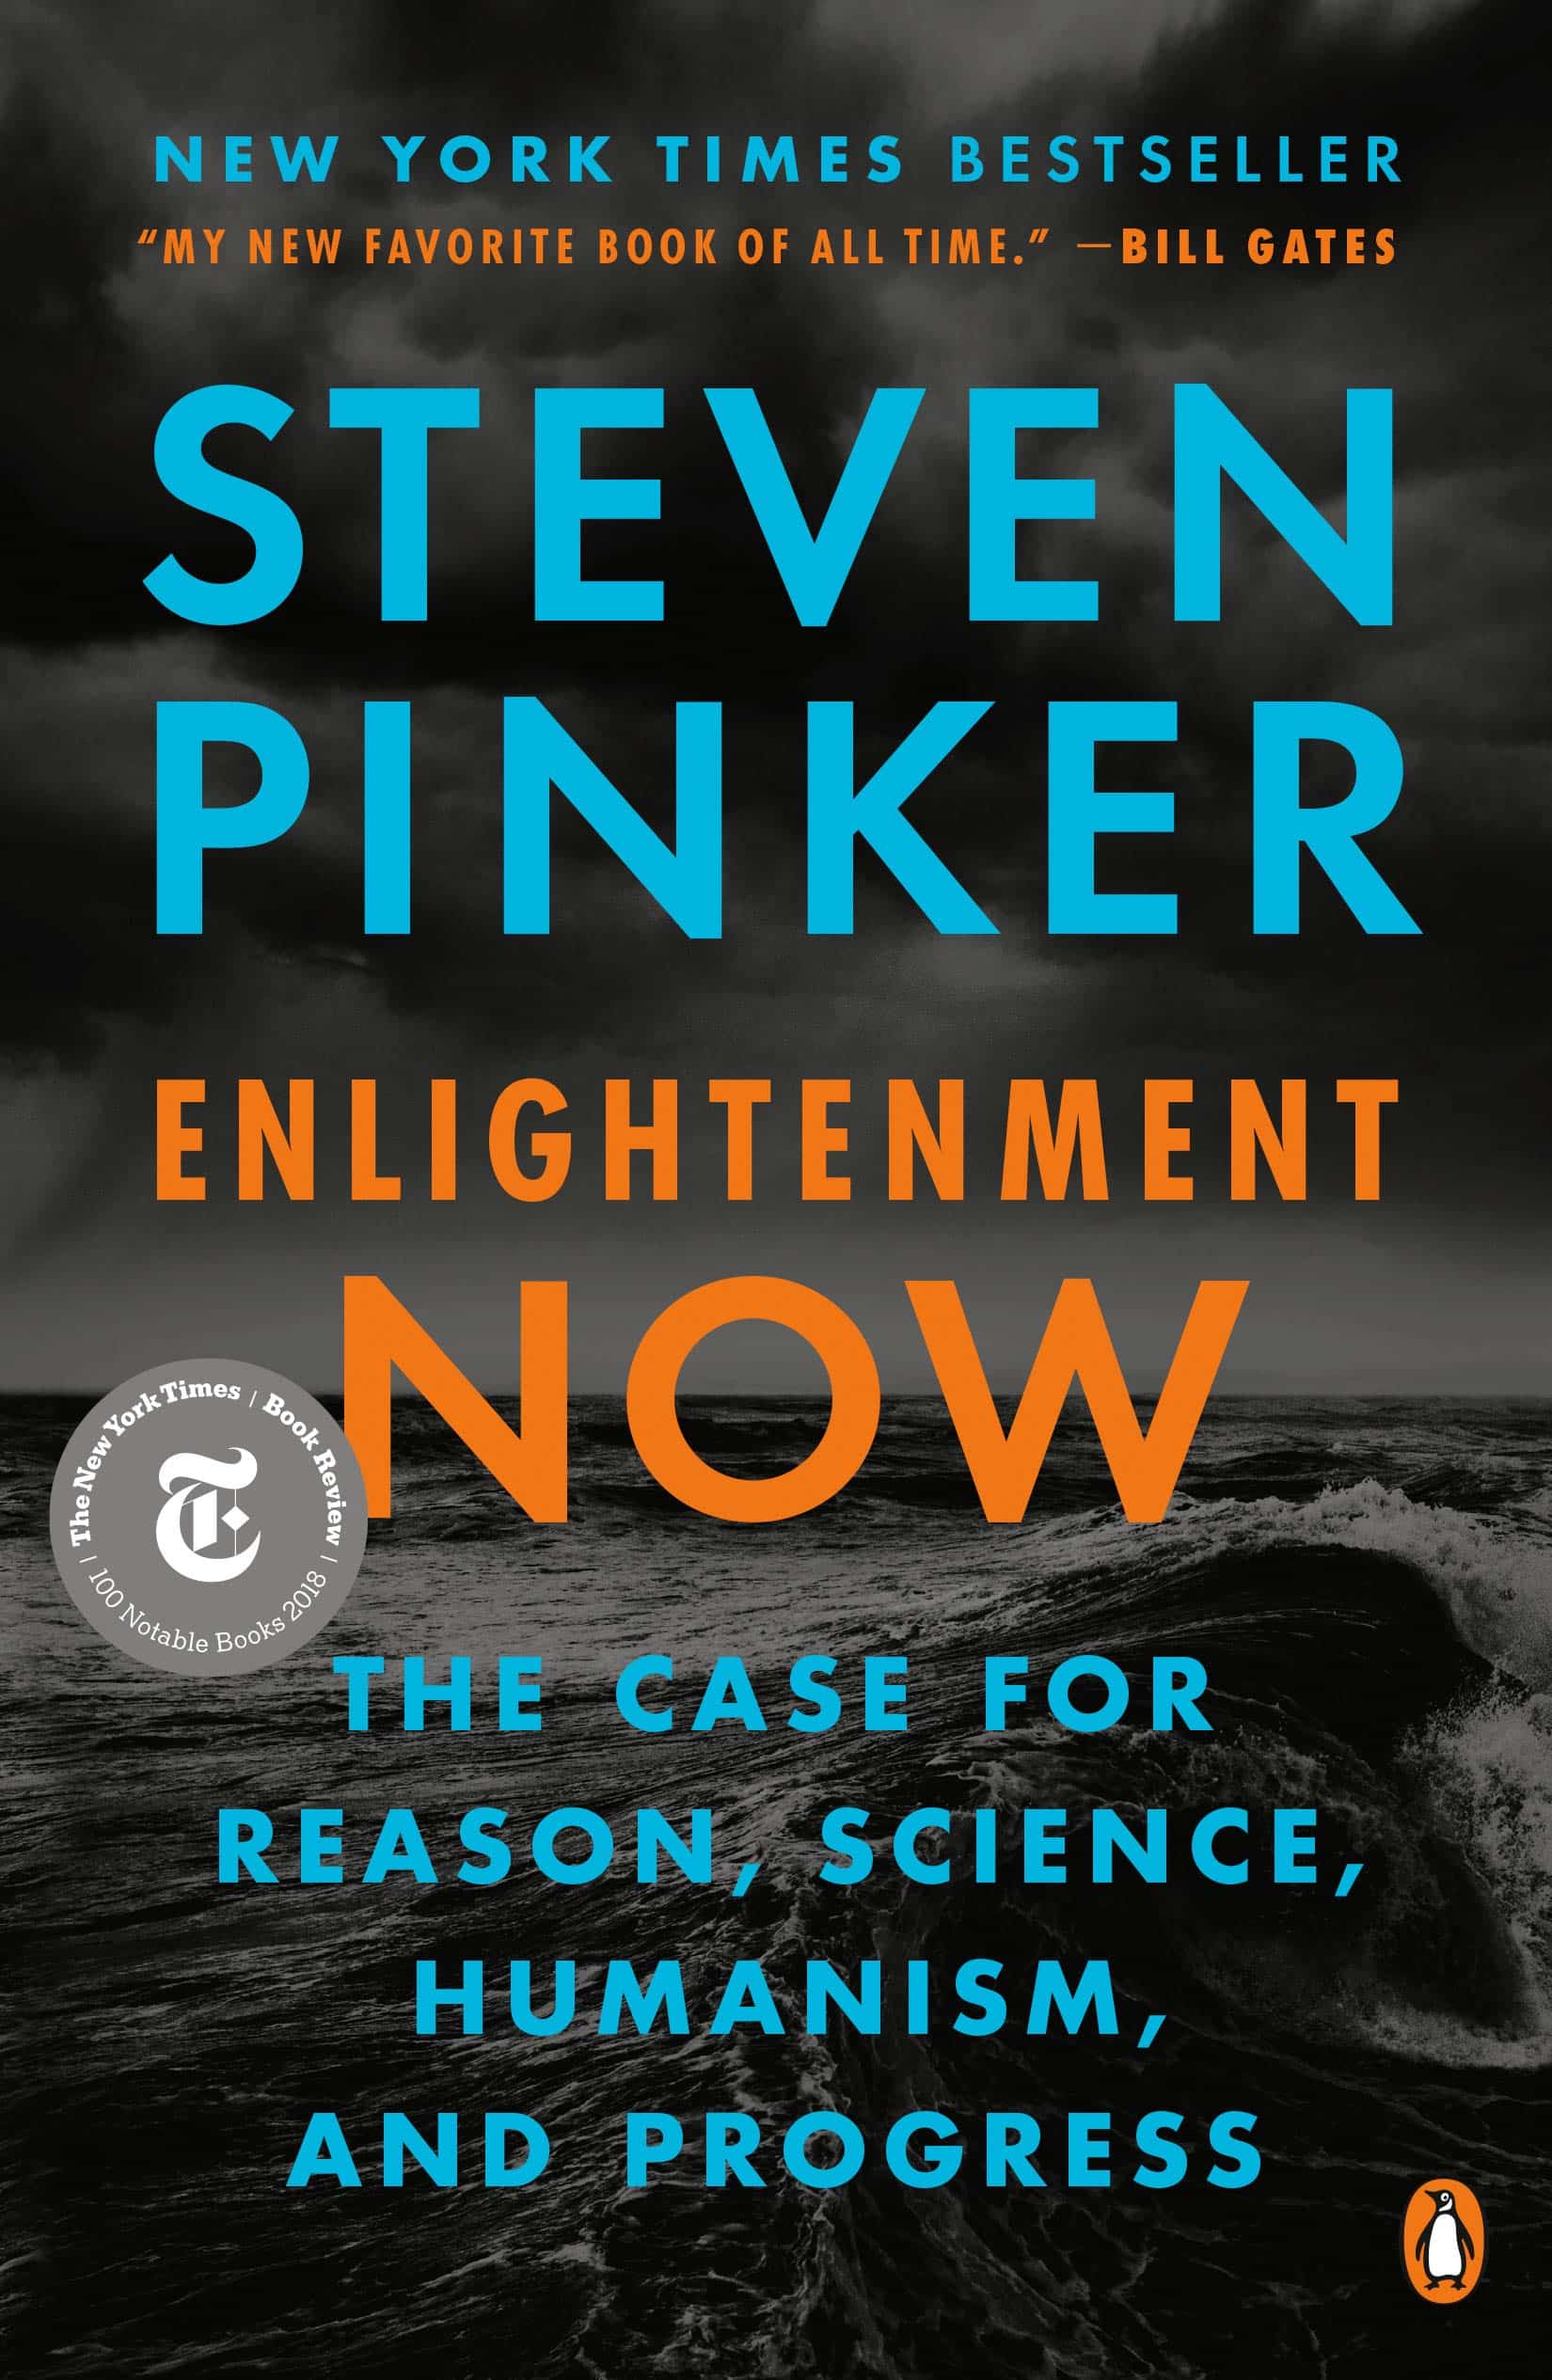 The cover of Enlightenment Now